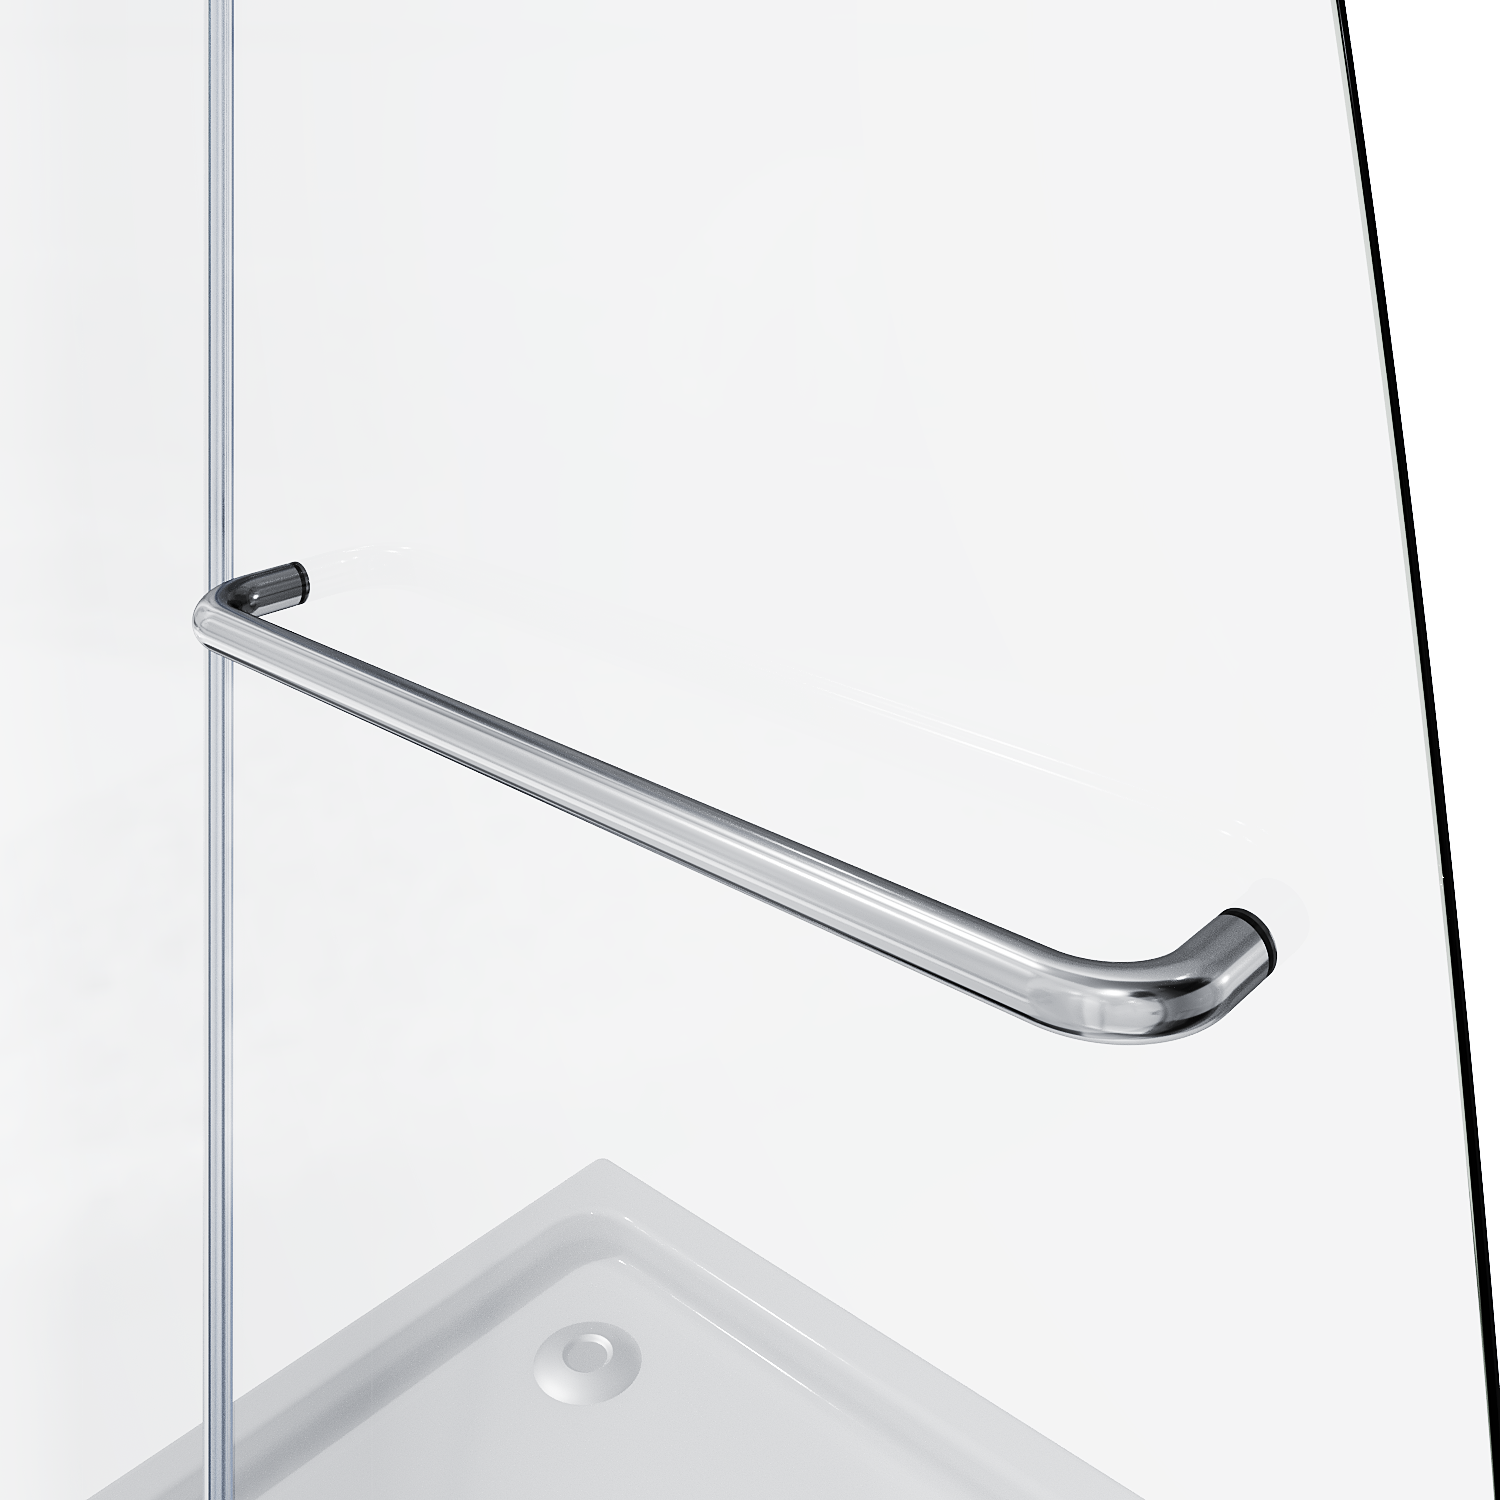 SL4U Shower frameless hinged tub door in Chrome with stainless steel Hardwares, 48'' W x 58'' H.